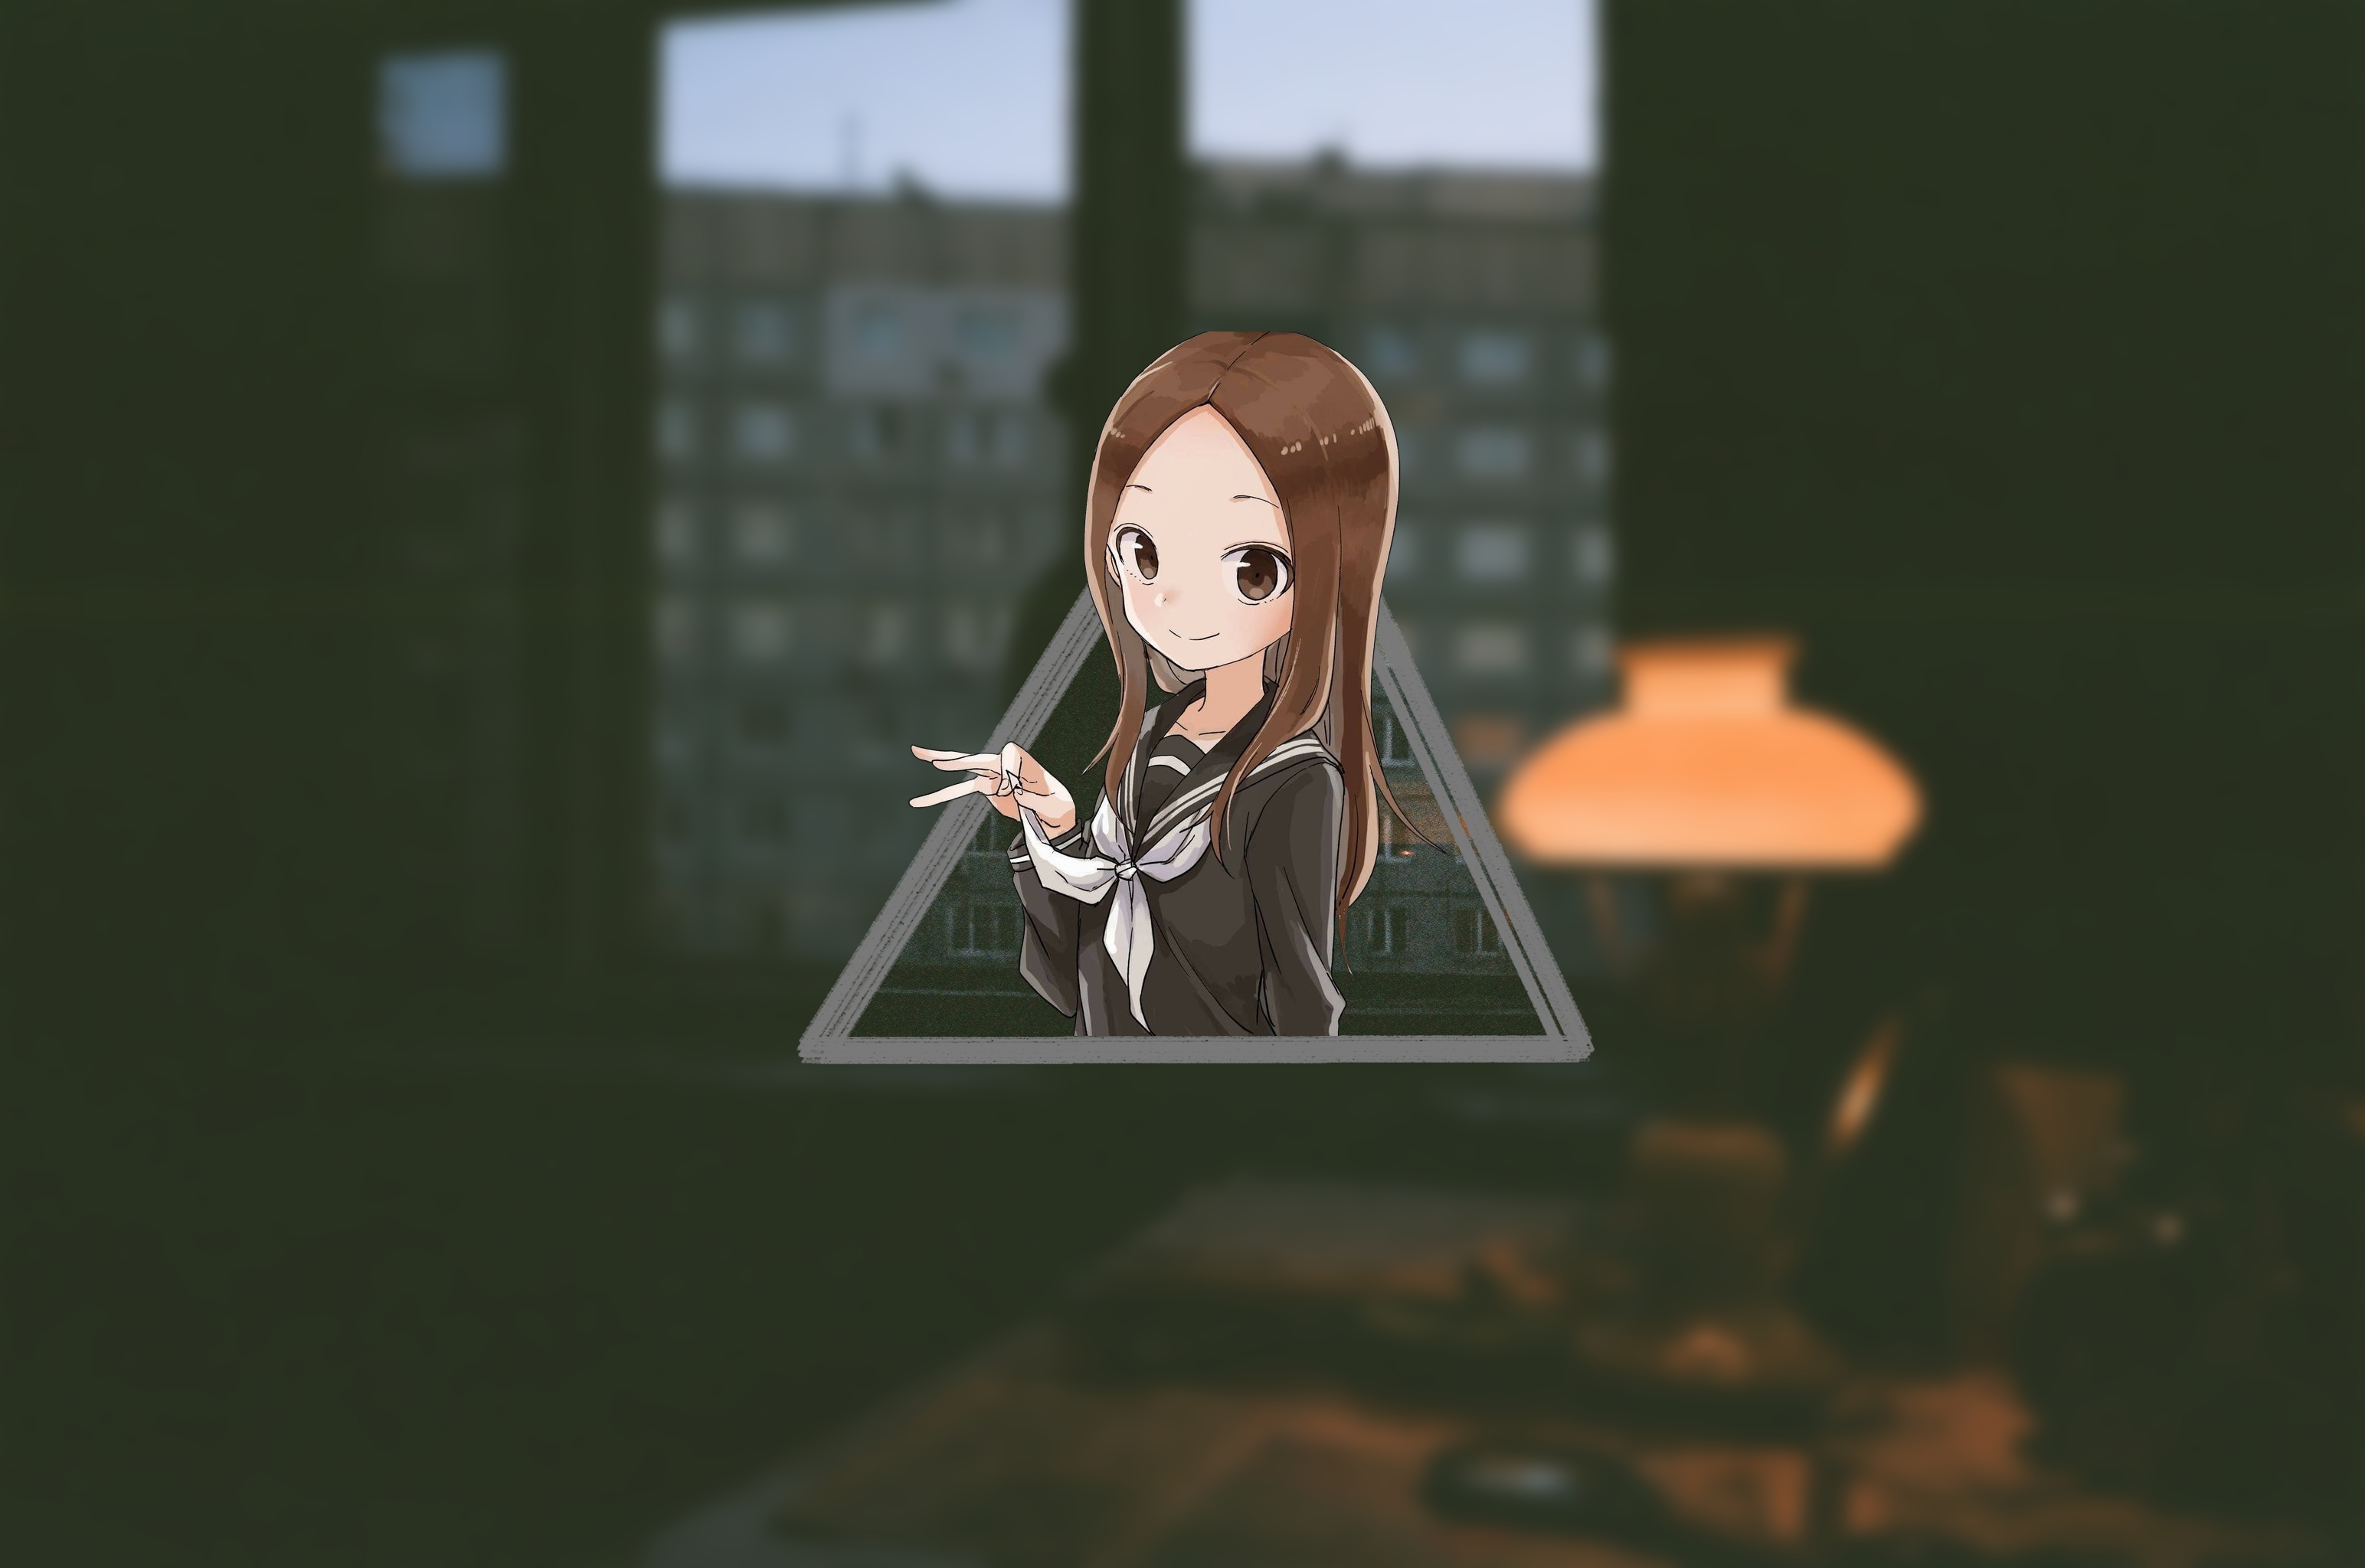 Takagi San Picture In Picture Anime Girls 3088x2048